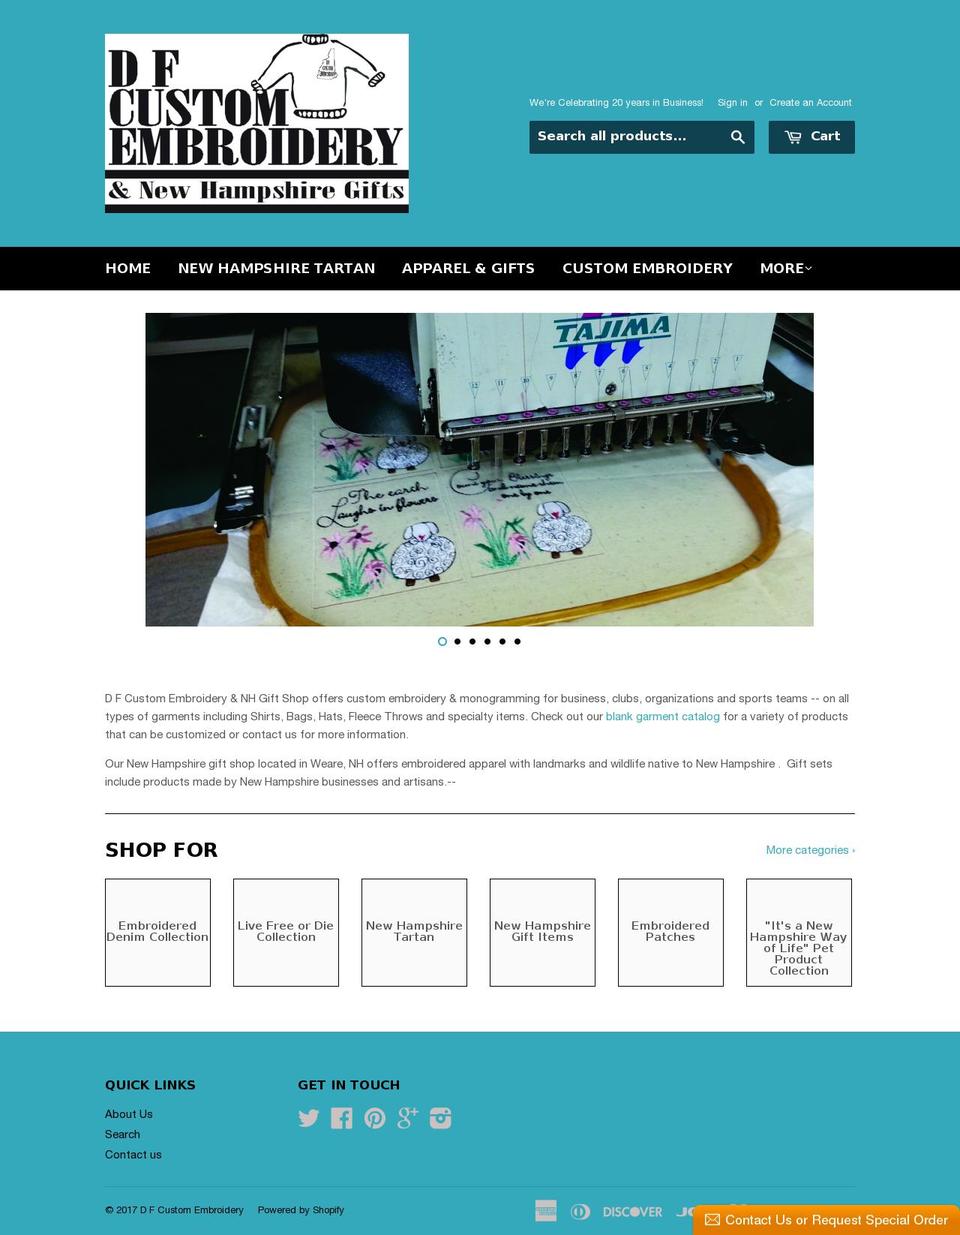 Craft Shopify theme site example dfembroidery.com